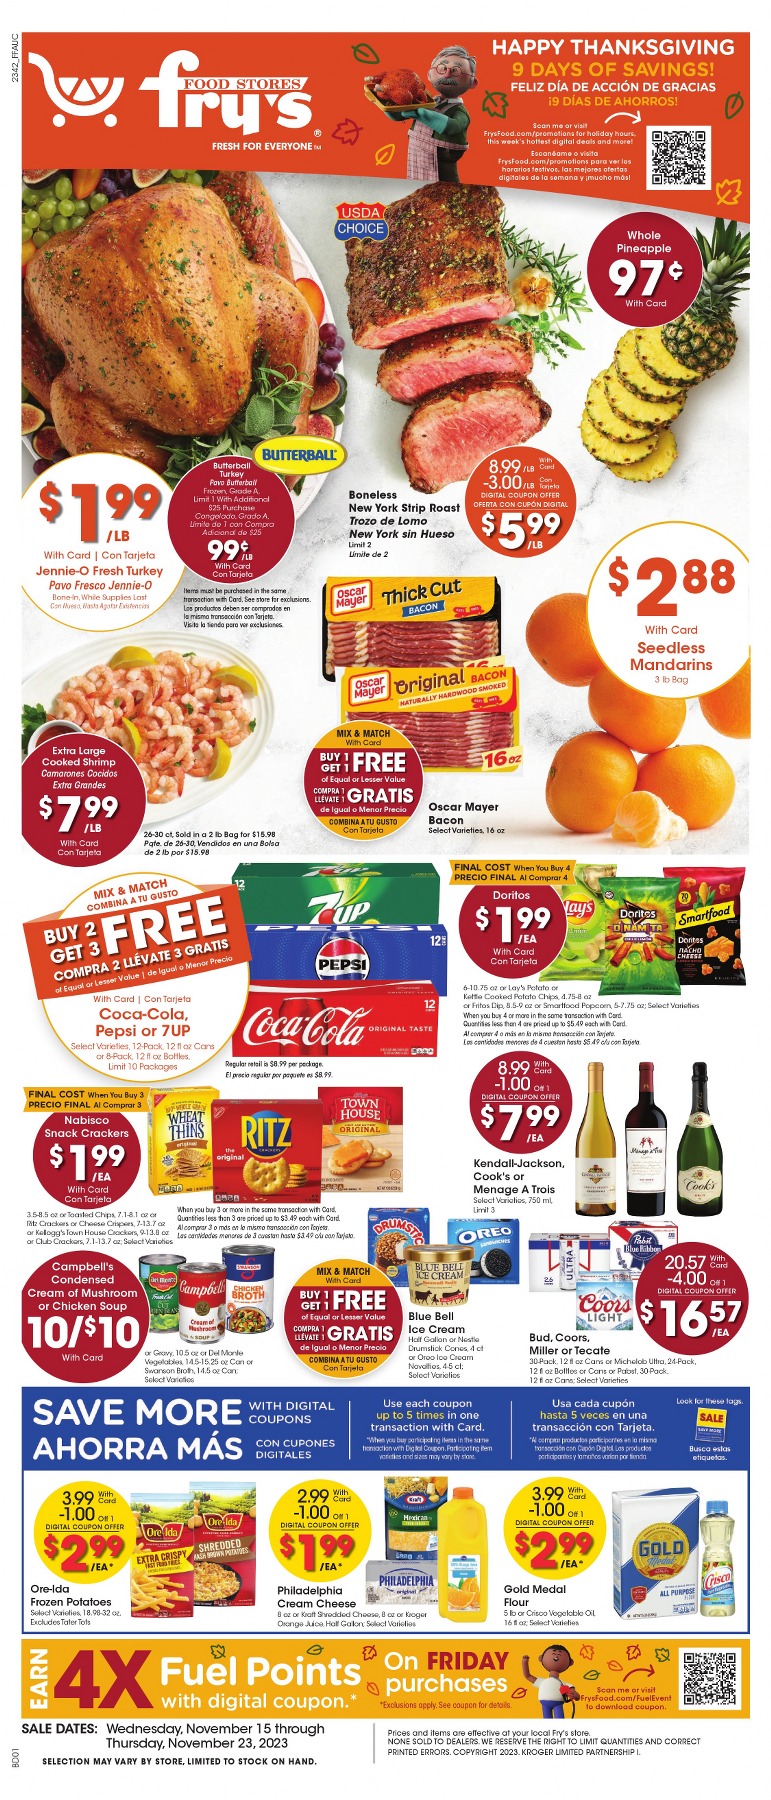 Fry's Food Christmas Deals 2023 1 – frys ad 1 1